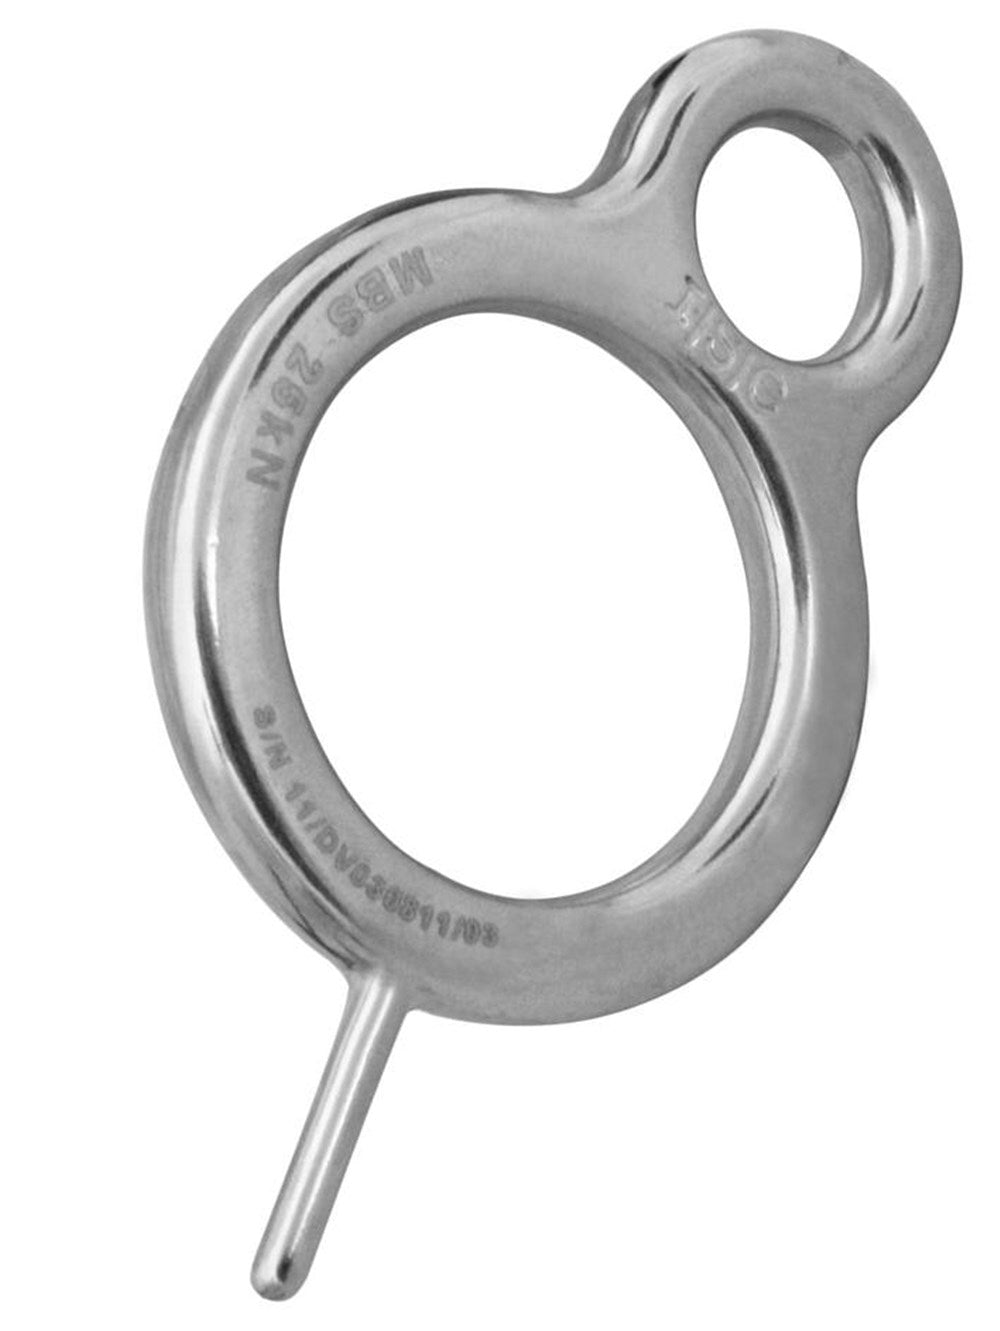 ISC Keeloc Ring St/St Ring Key